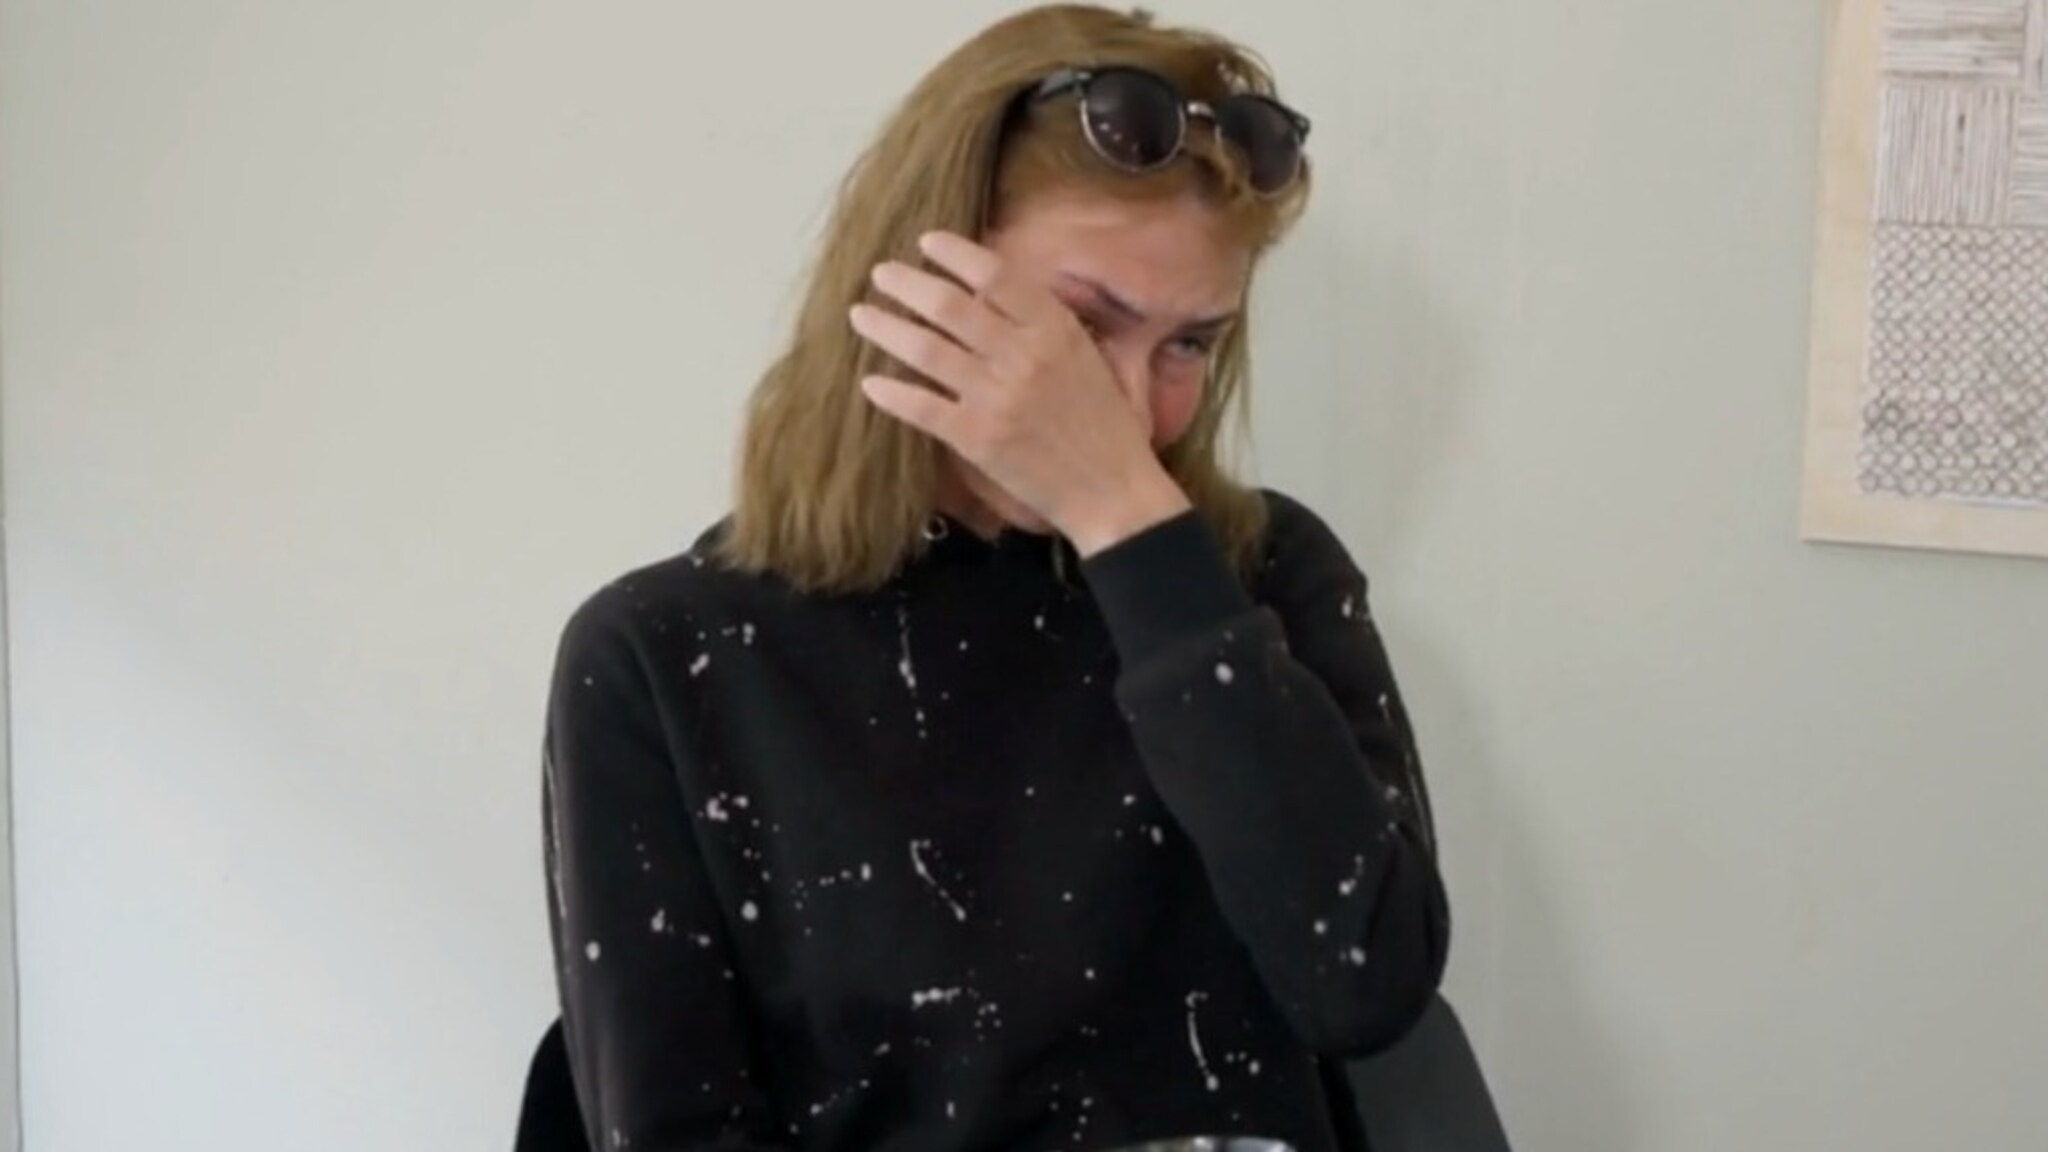 20-year-old Nina bursts into tears as she says: 'The bucket is full'